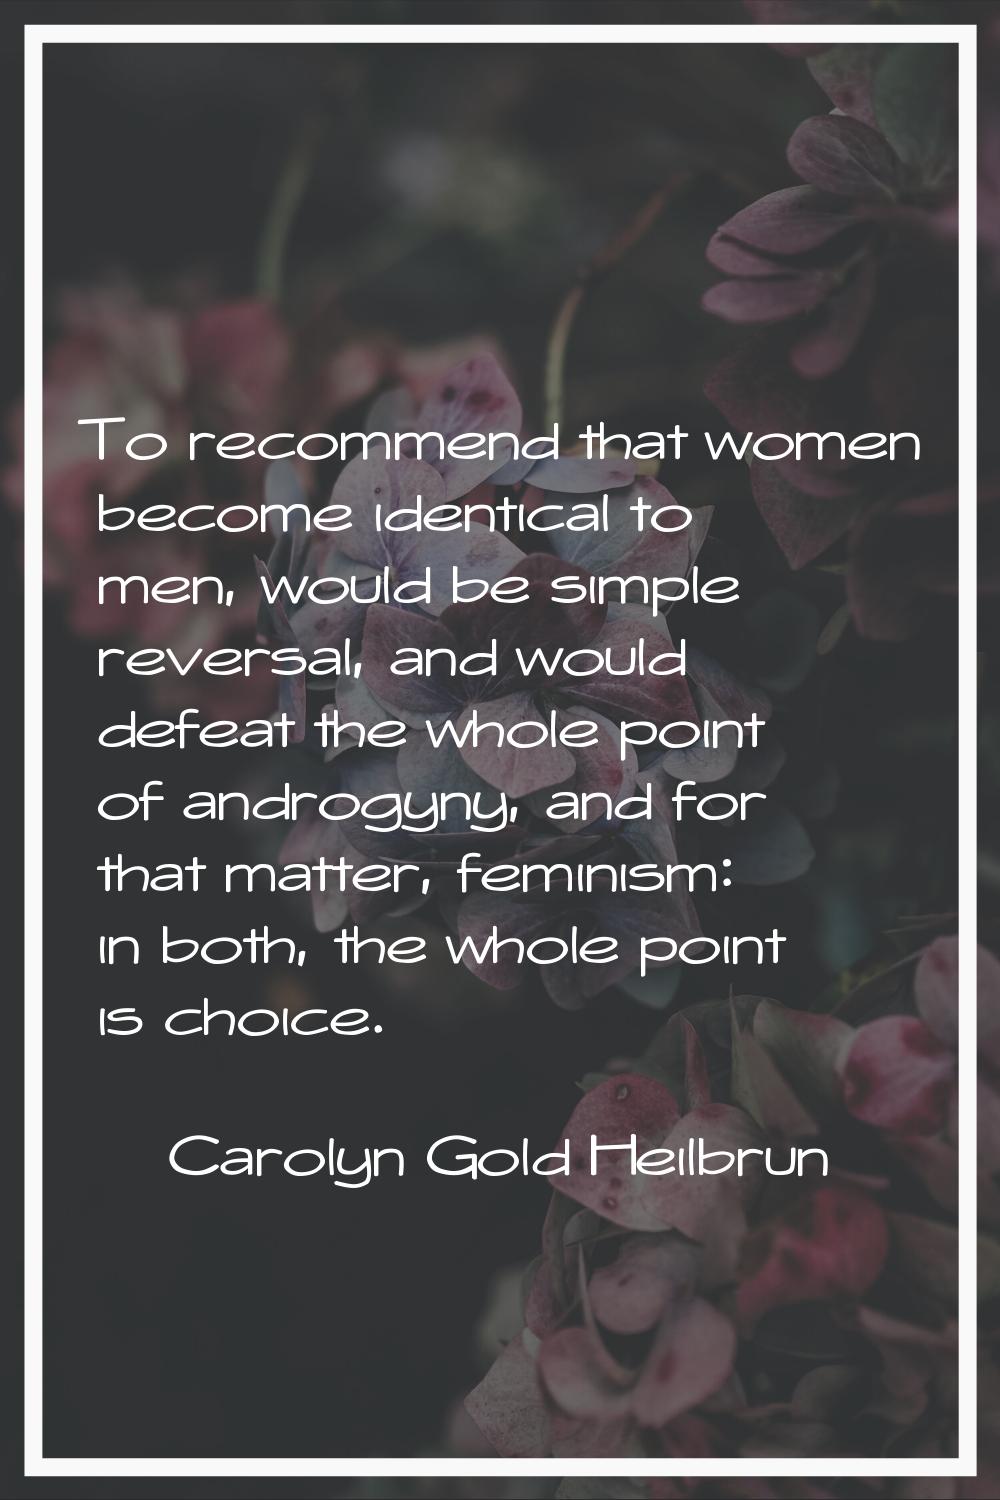 To recommend that women become identical to men, would be simple reversal, and would defeat the who